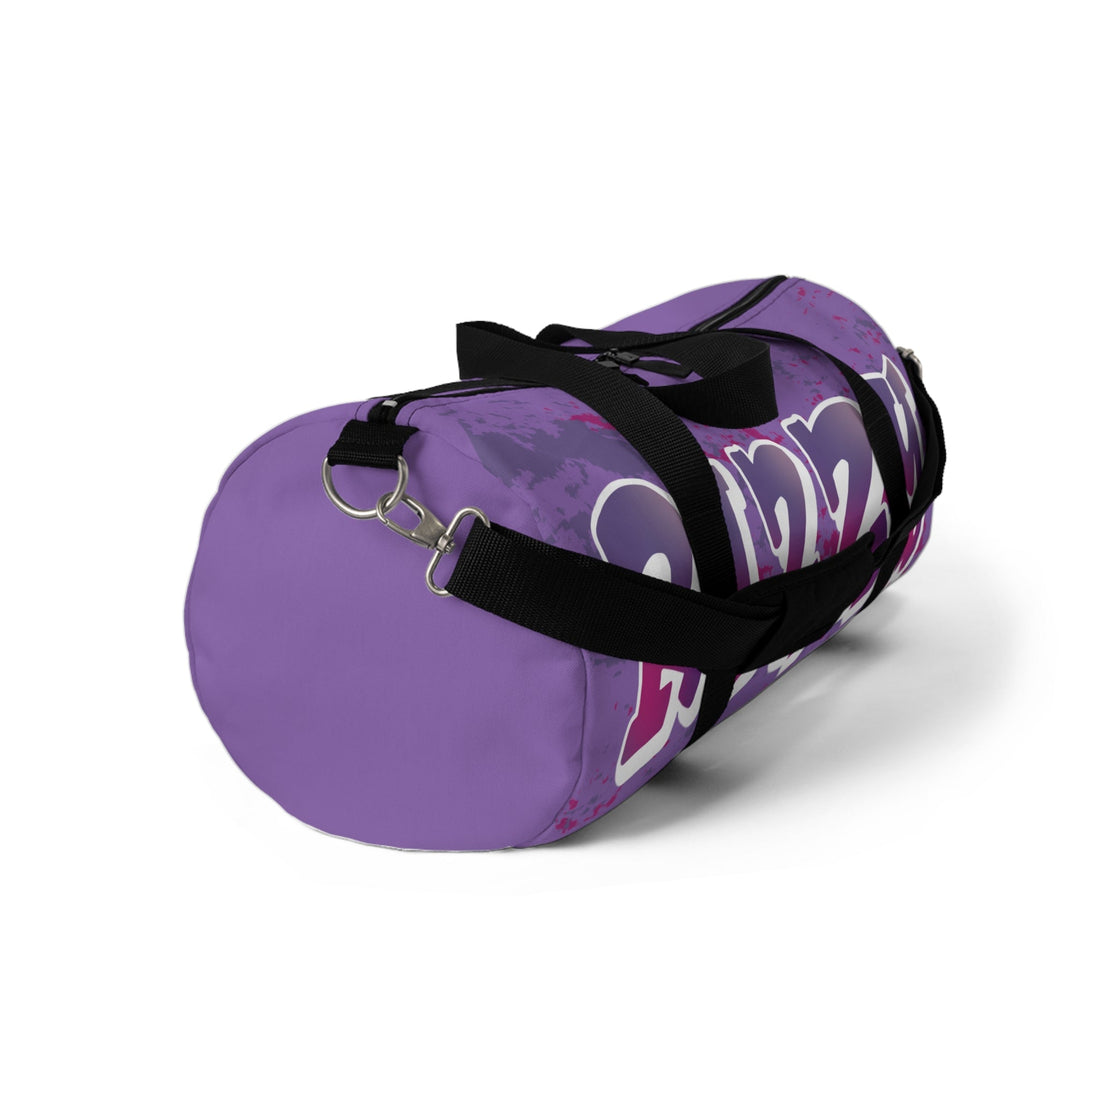 Rizzy Duffel Bag - Bags - Positively Sassy - Rizzy Duffel Bag